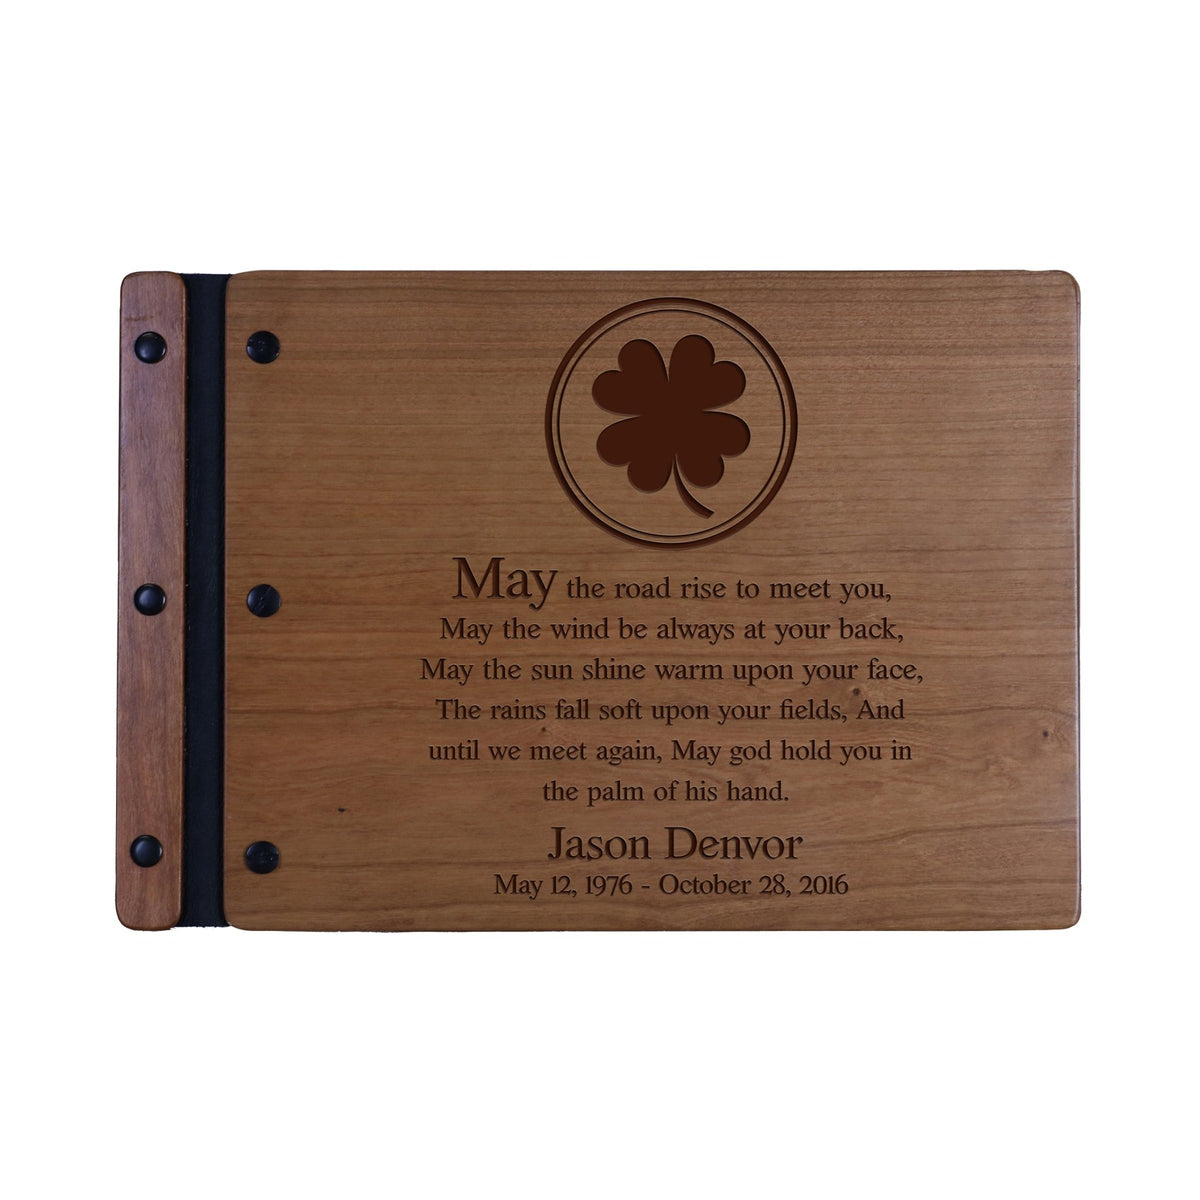 Custom Engraved Wooden Memorial Guestbook 12.375” x 8.5” x .75” May The Road Rise To Meet You - LifeSong Milestones